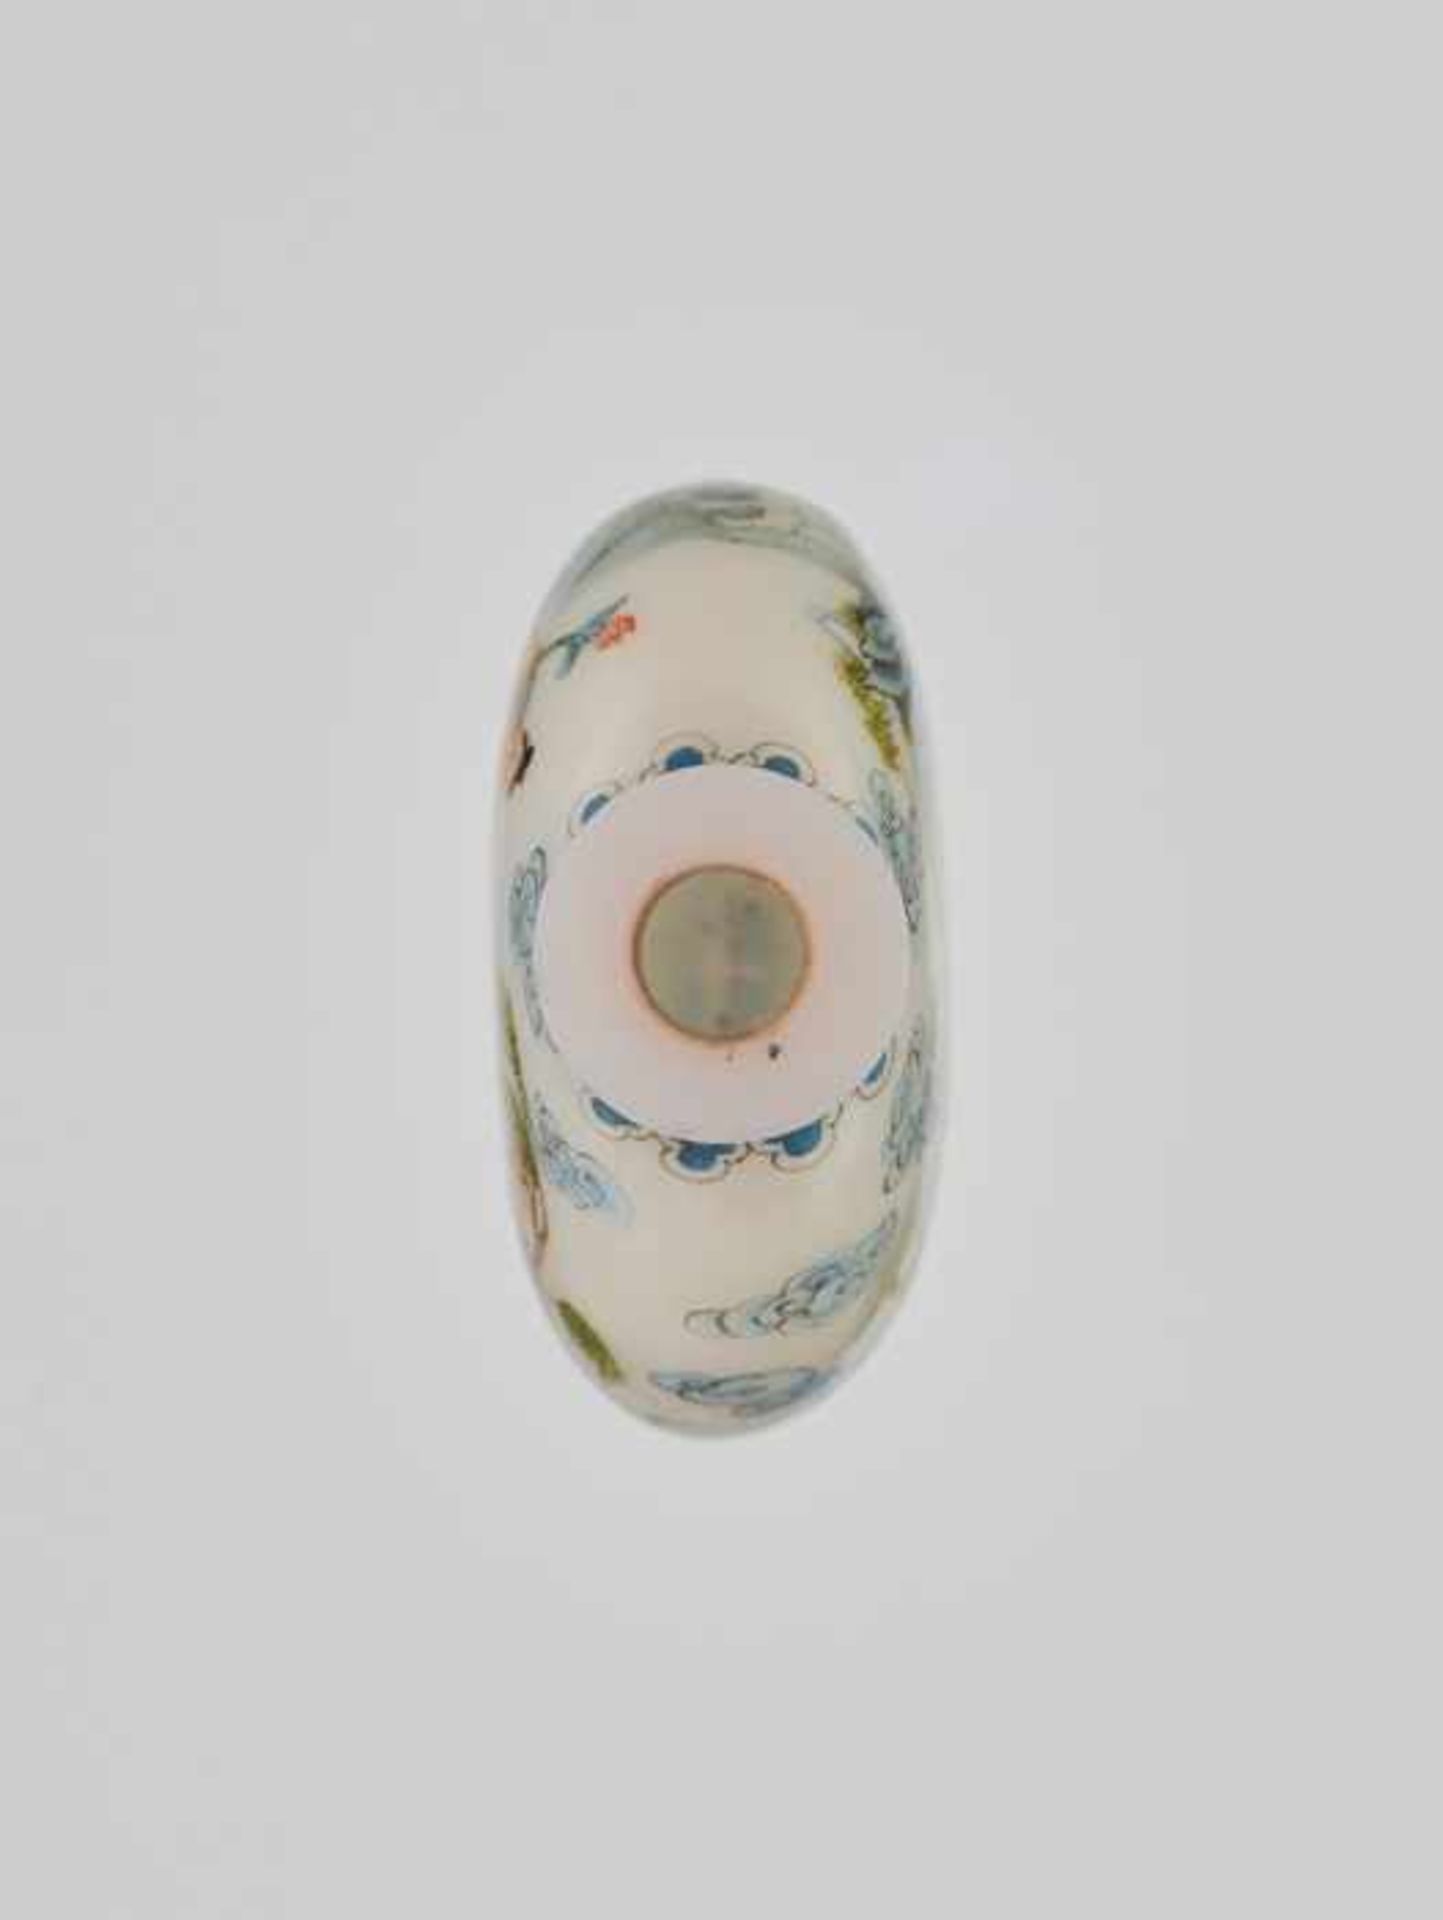 AN ENAMELED ‘BAXIAN’ GLASS SNUFF BOTTLE, 20th CENTURY Opaque white glass with delicately painted - Image 5 of 6